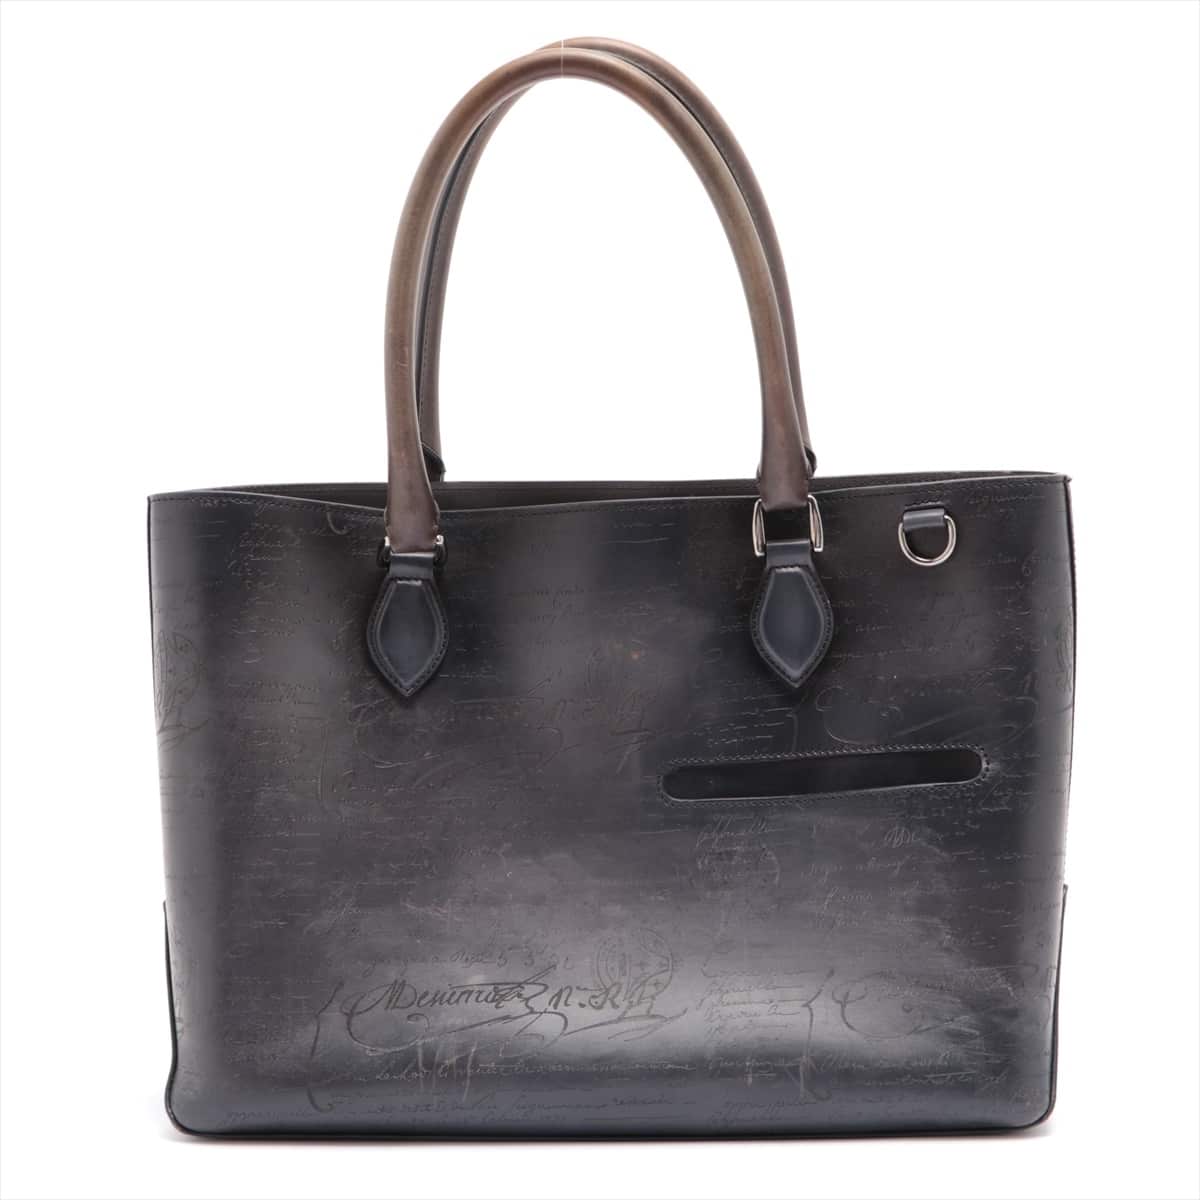 Berluti Calligraphy Toujour Leather Tote bag Navy blue